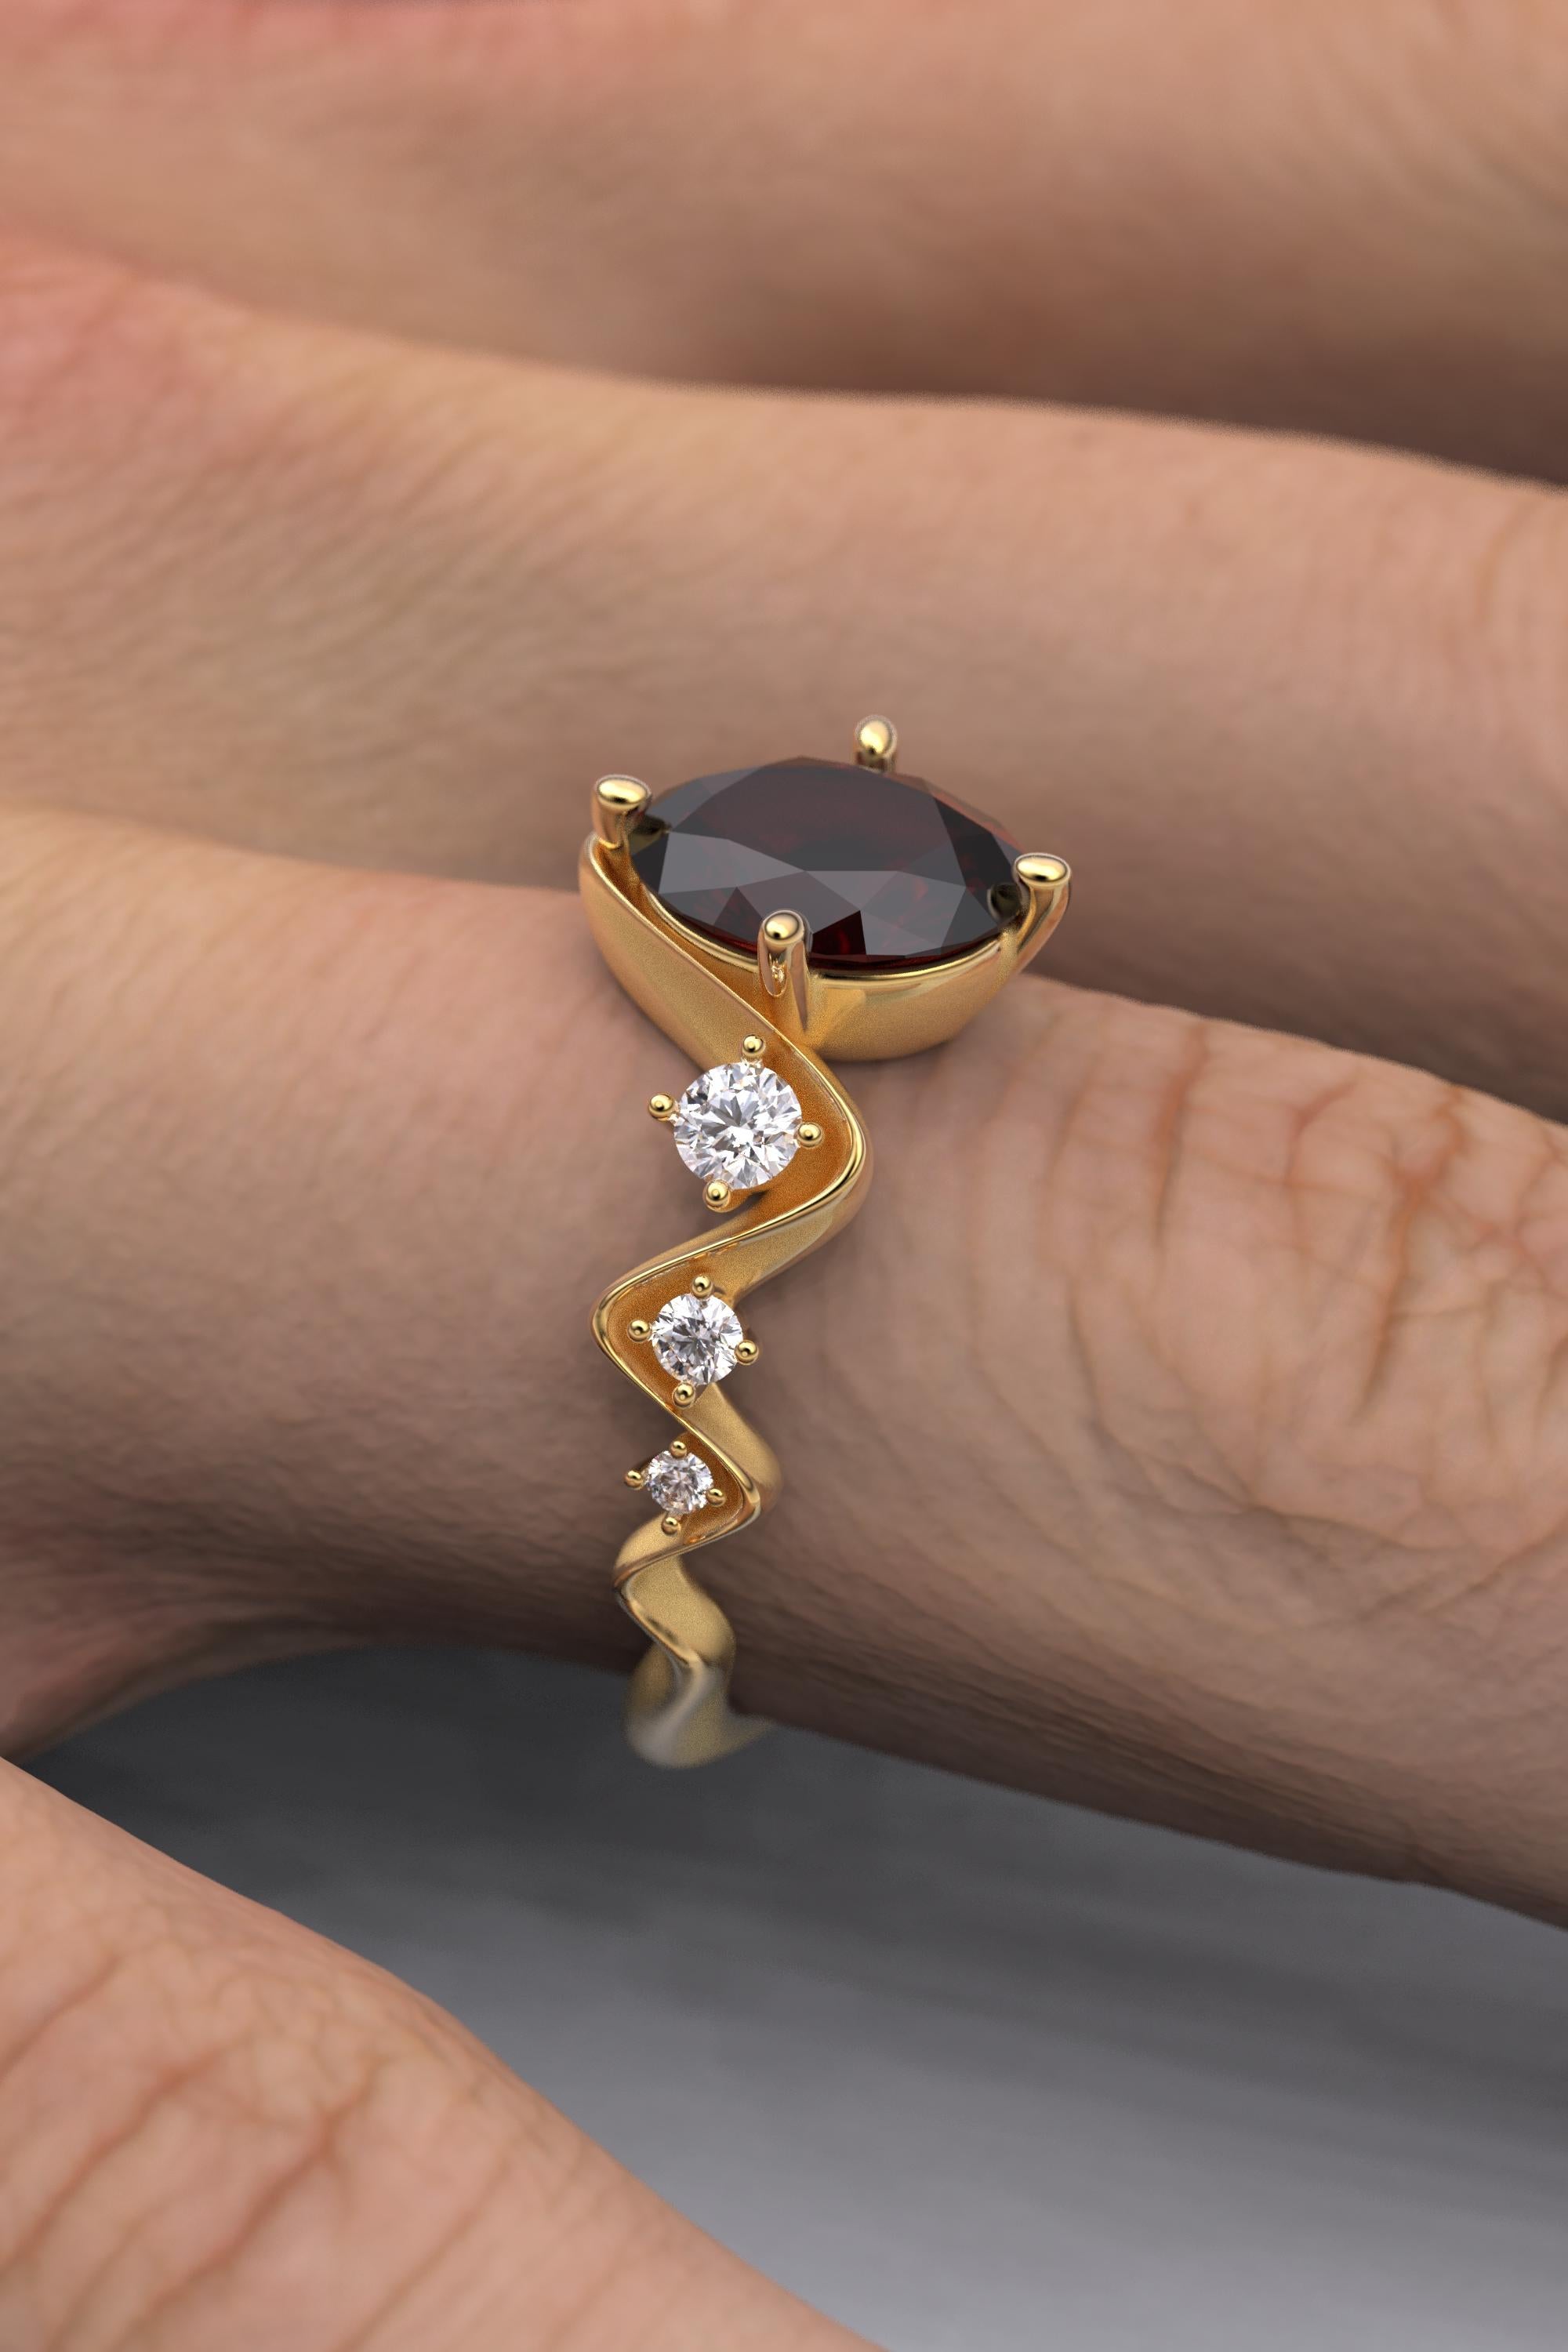 For Sale:  Garnet and Diamonds Engagement Ring Made in Italy by Oltremare Gioielli 18k Gold 4